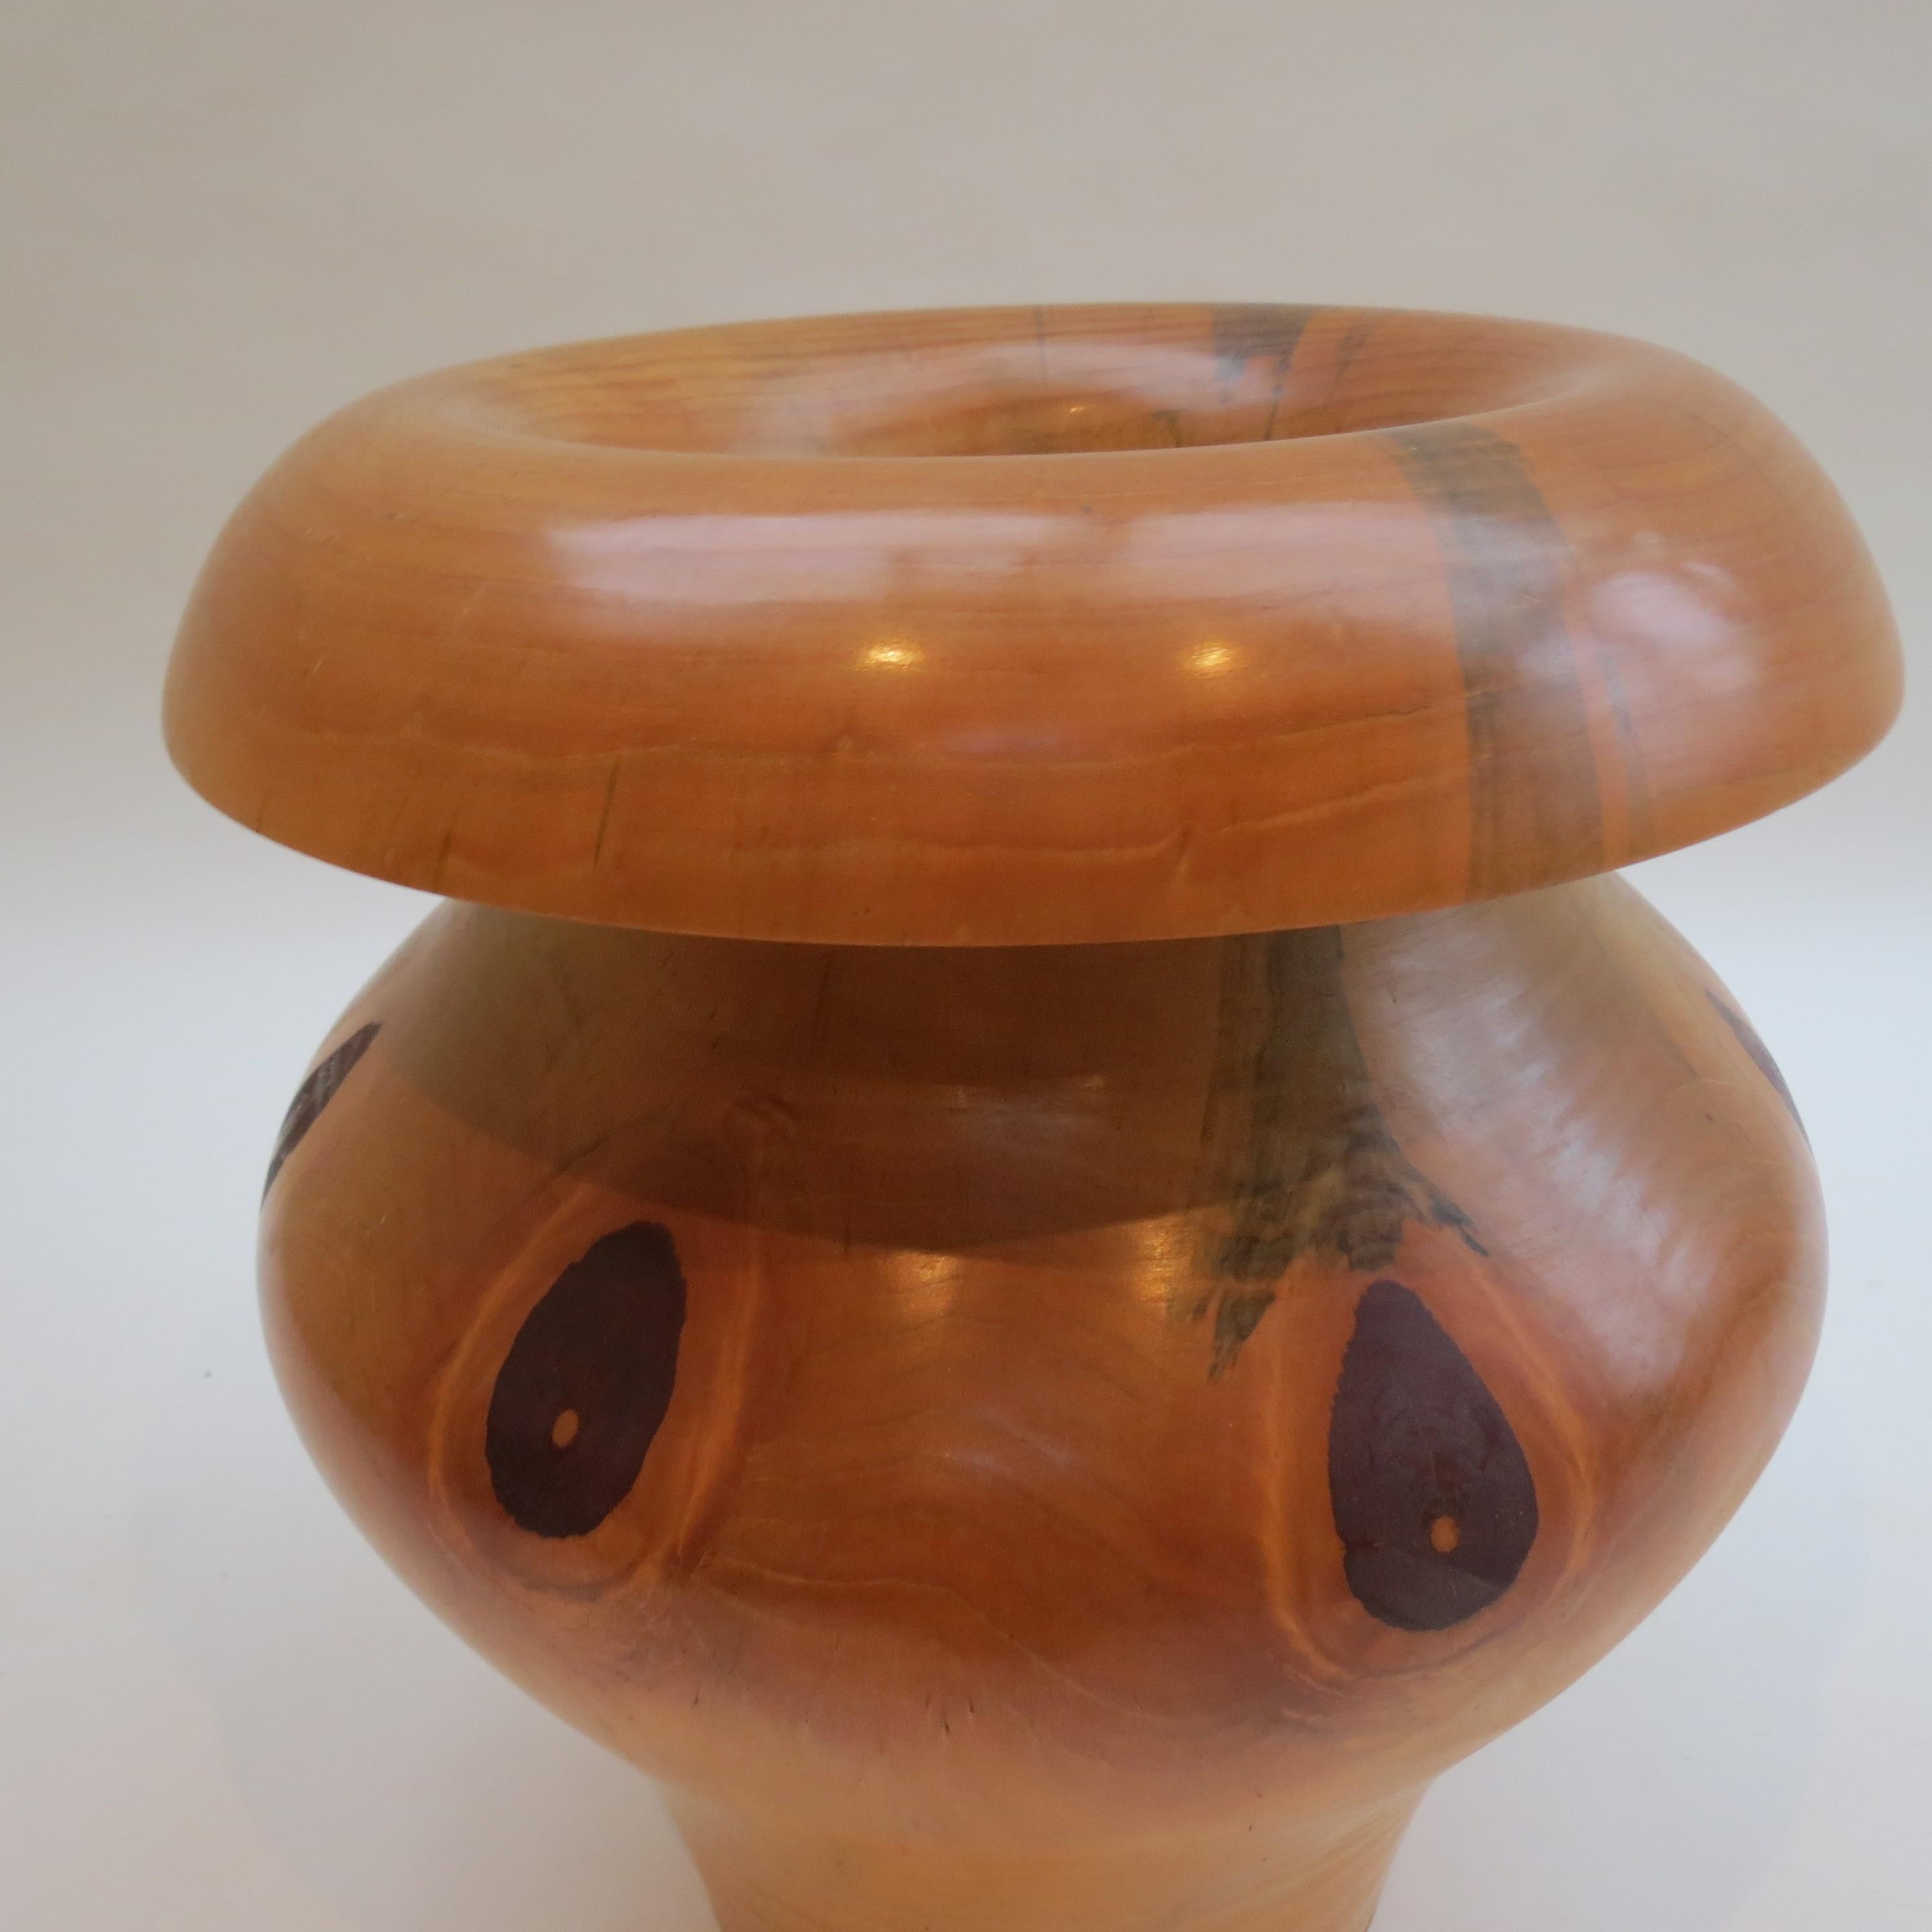 Hand-Crafted Very Large Chile Pine Wood Sculptural Pot Handcrafted by Stephen Cooper, England